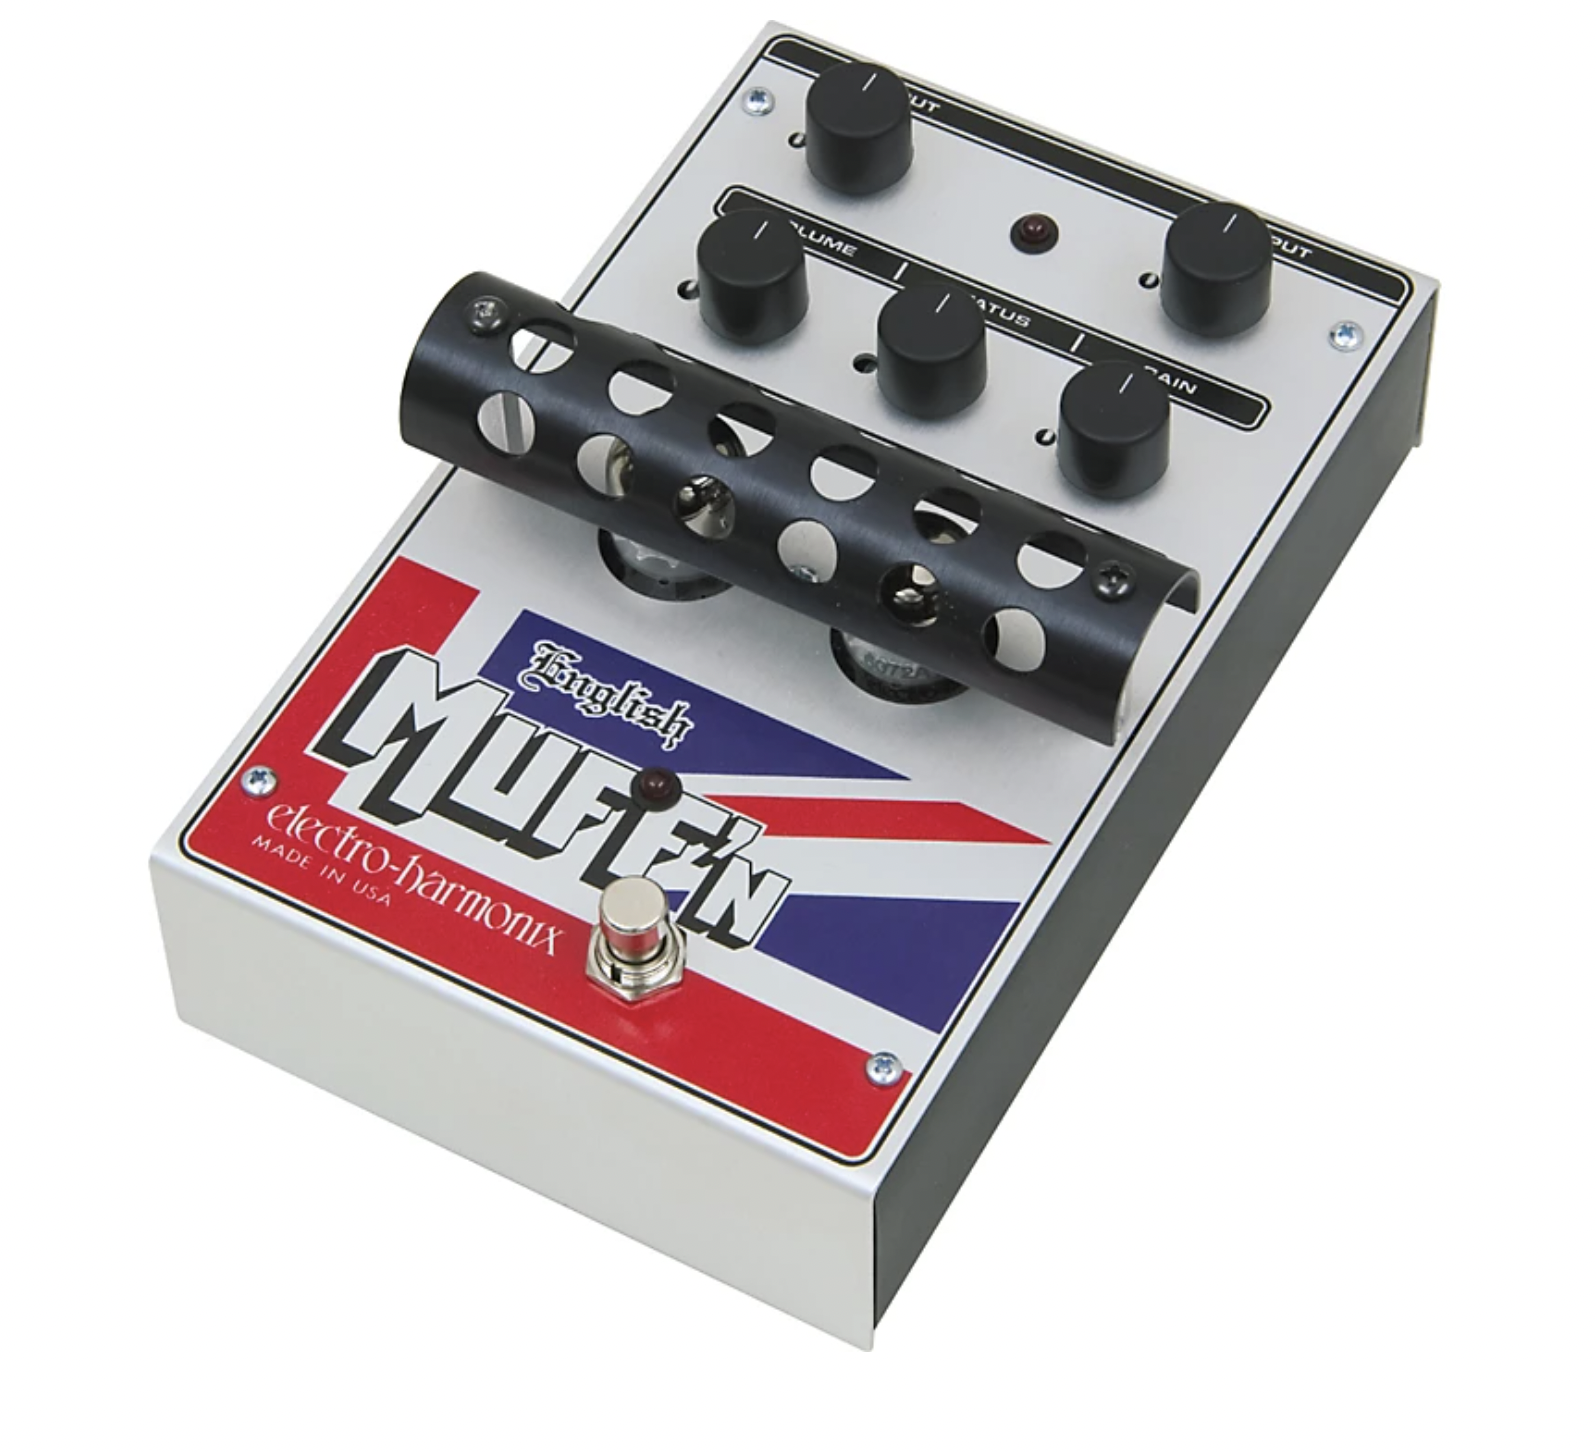 Electro-Harmonix Classics English Muff'n Overdrive Guitar Effects Pedal | Reverb